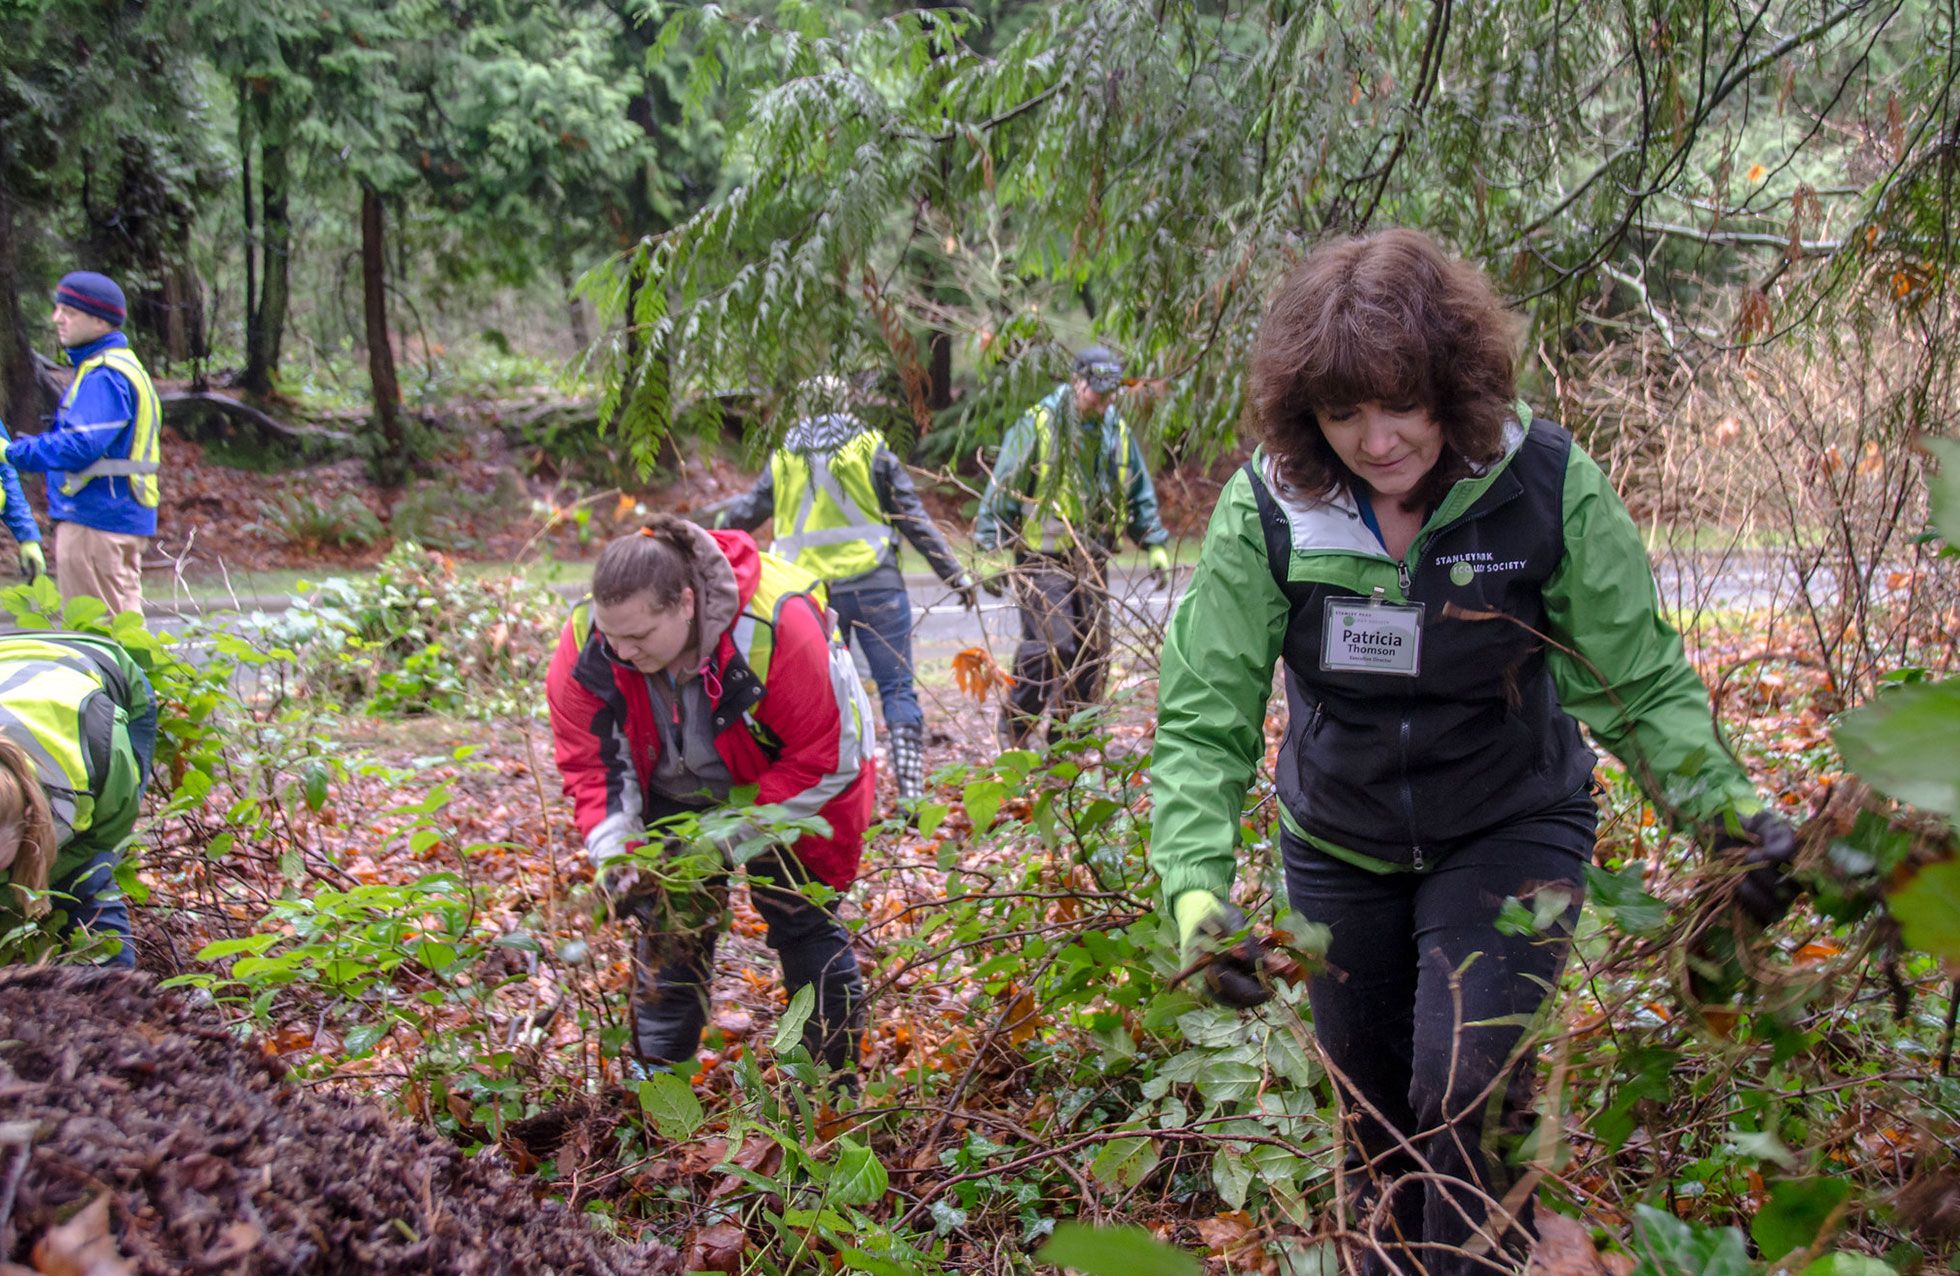 Volunteers remove invasive English ivy in Stanley Park. Credit: Don Enright